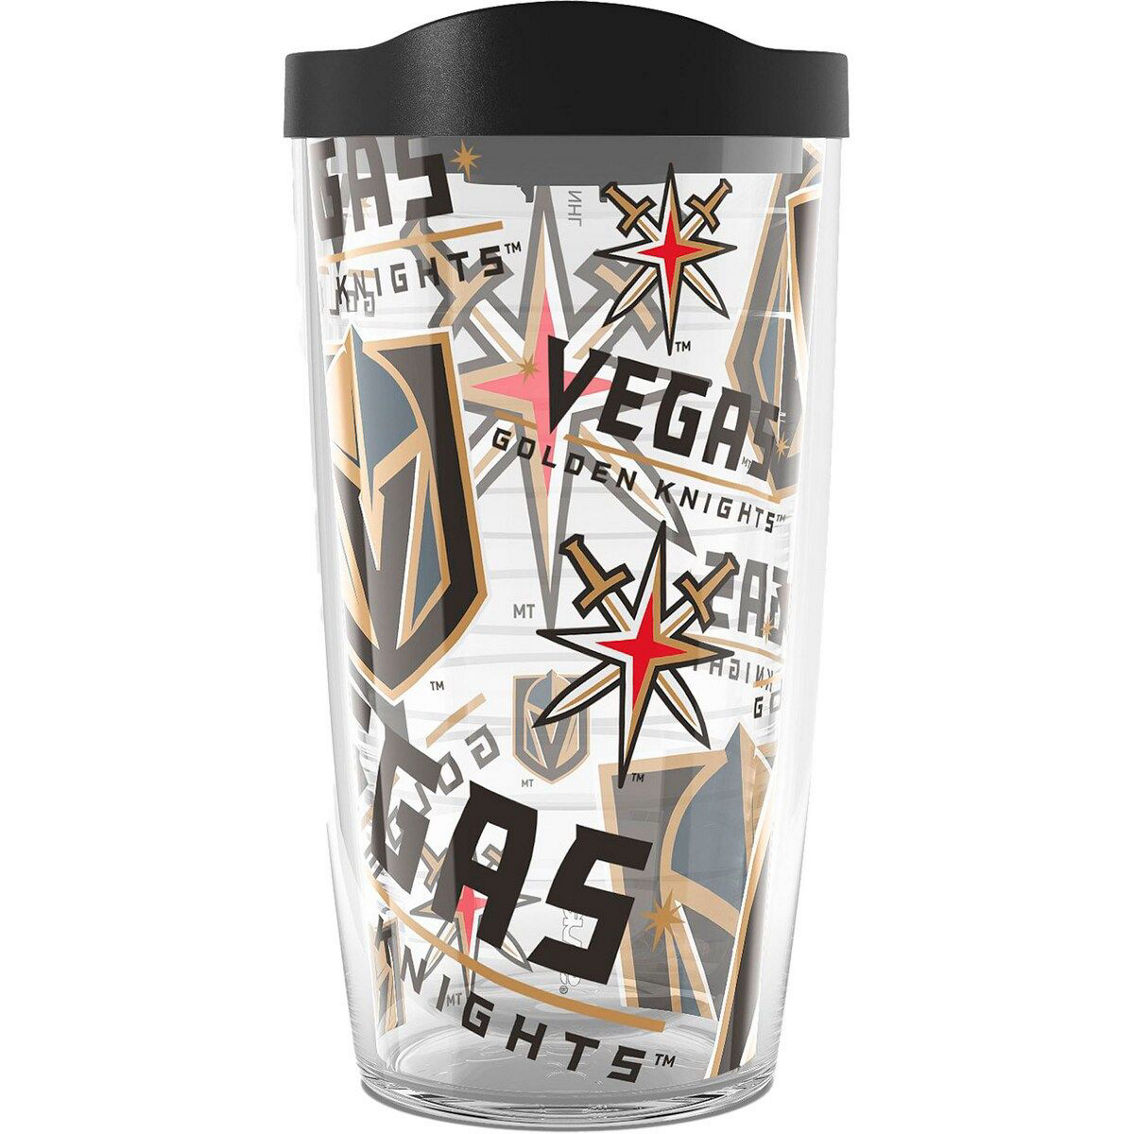 Tervis Vegas Golden Knights 16oz. Allover Classic Tumbler - Image 2 of 2